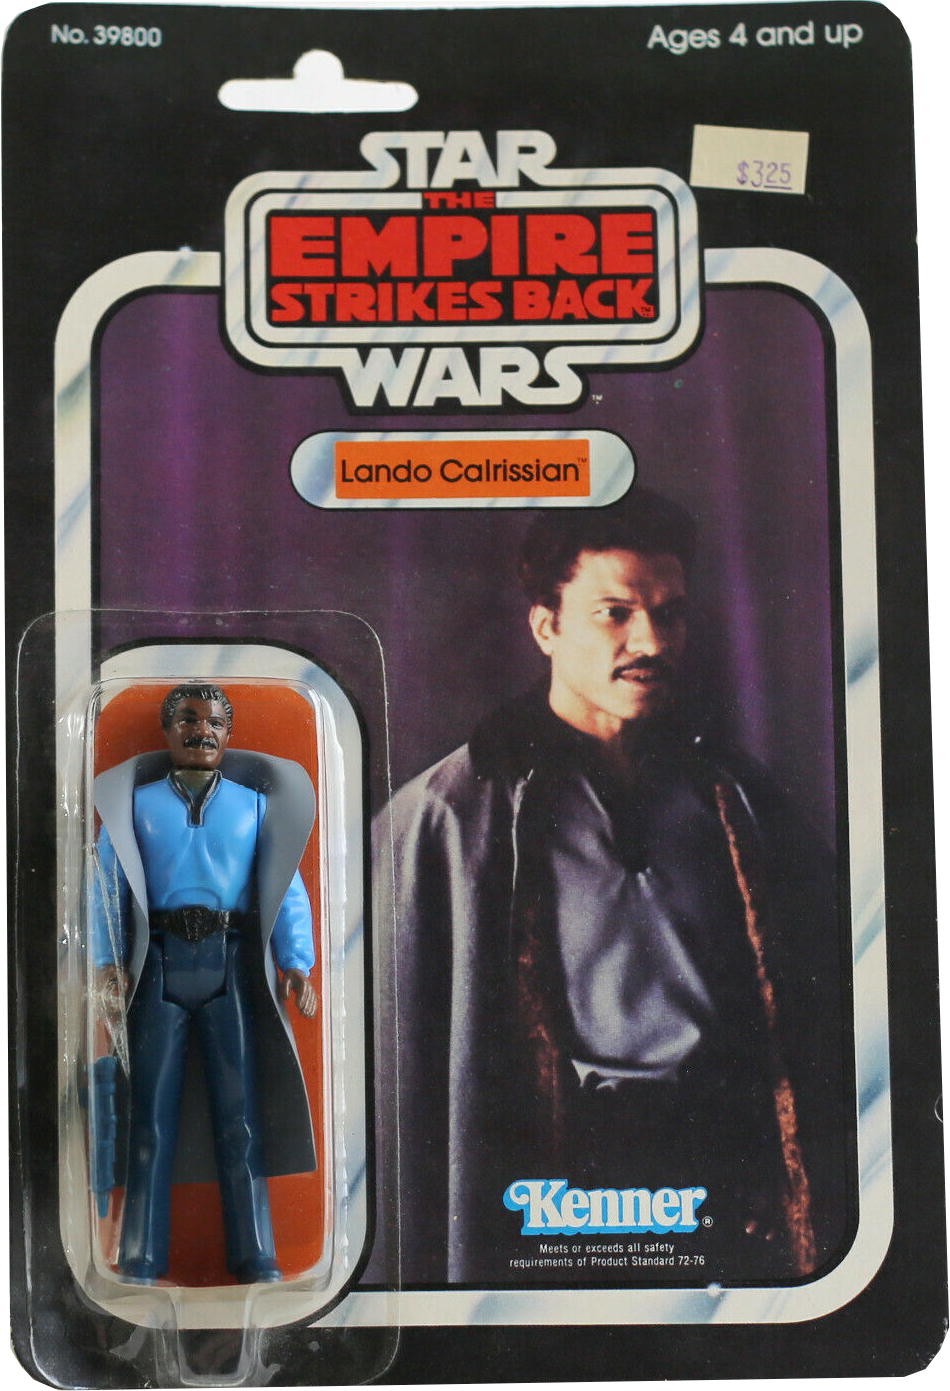 Star Wars Retro Collection Kenner Lando Calrissian Only $5 USA SHIP IN HAND VNTG 